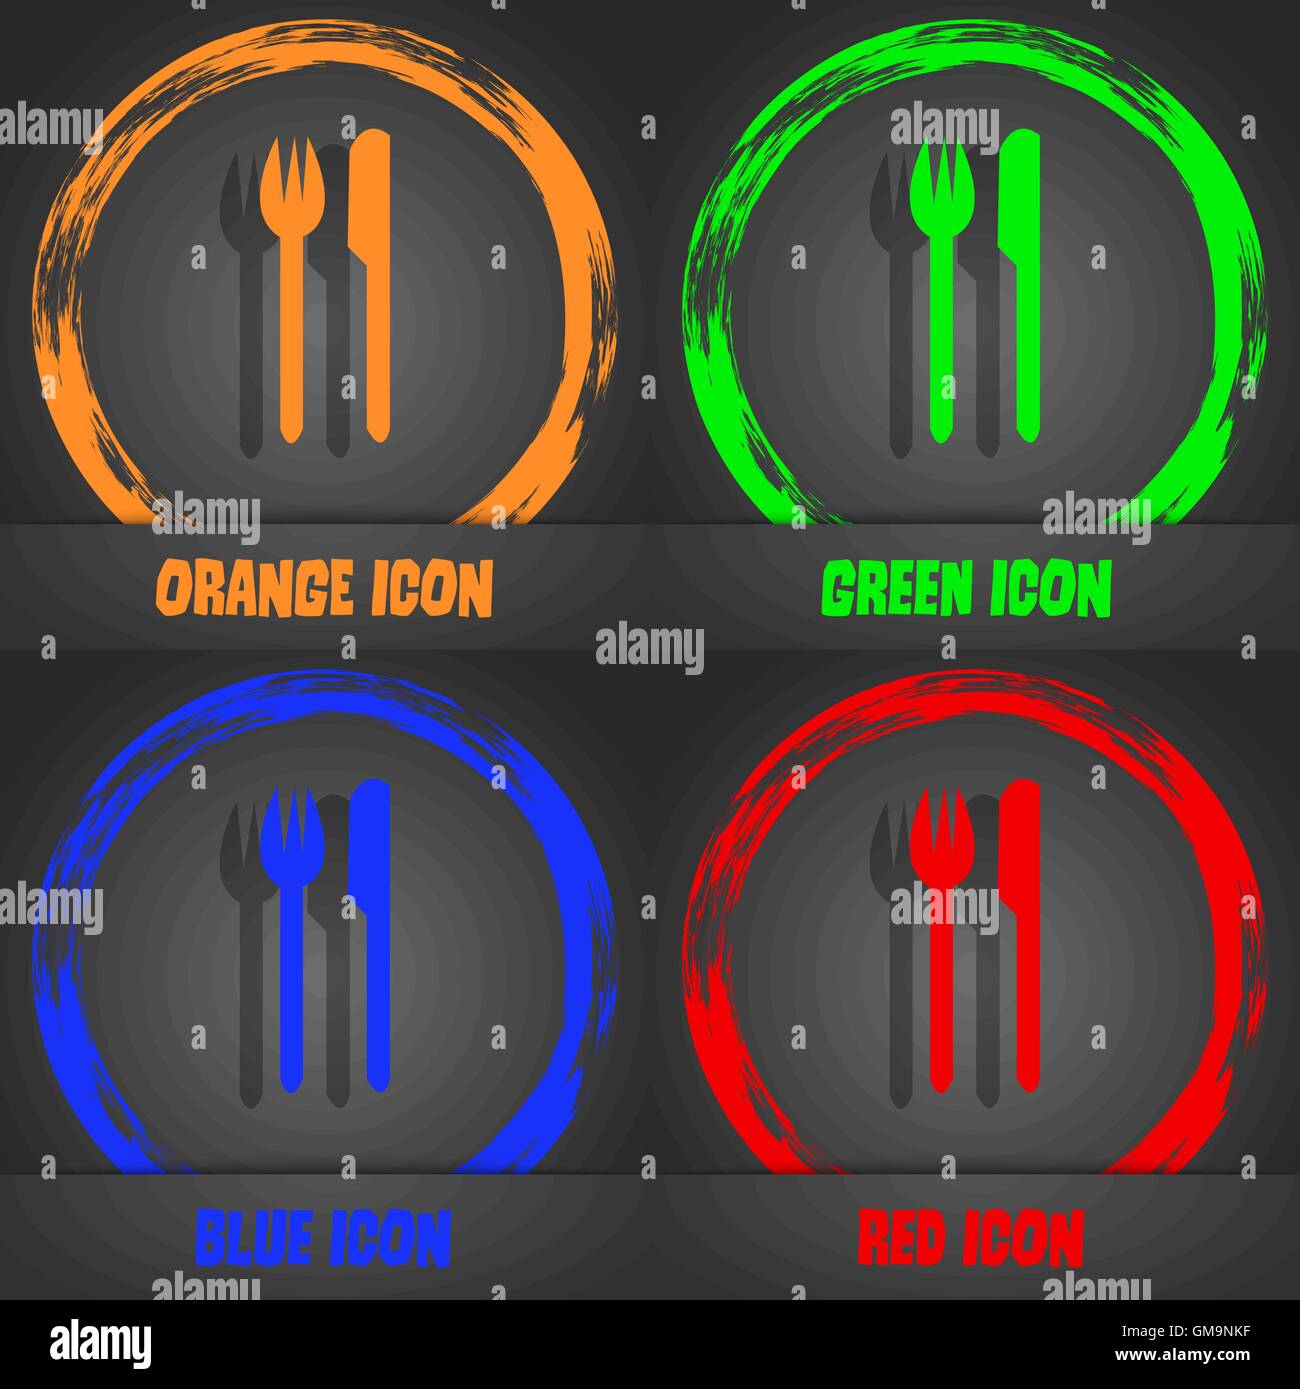 Eat sign icon. Cutlery symbol. Fork and knife. Fashionable modern style. In the orange, green, blue, red design. Vector Stock Vector